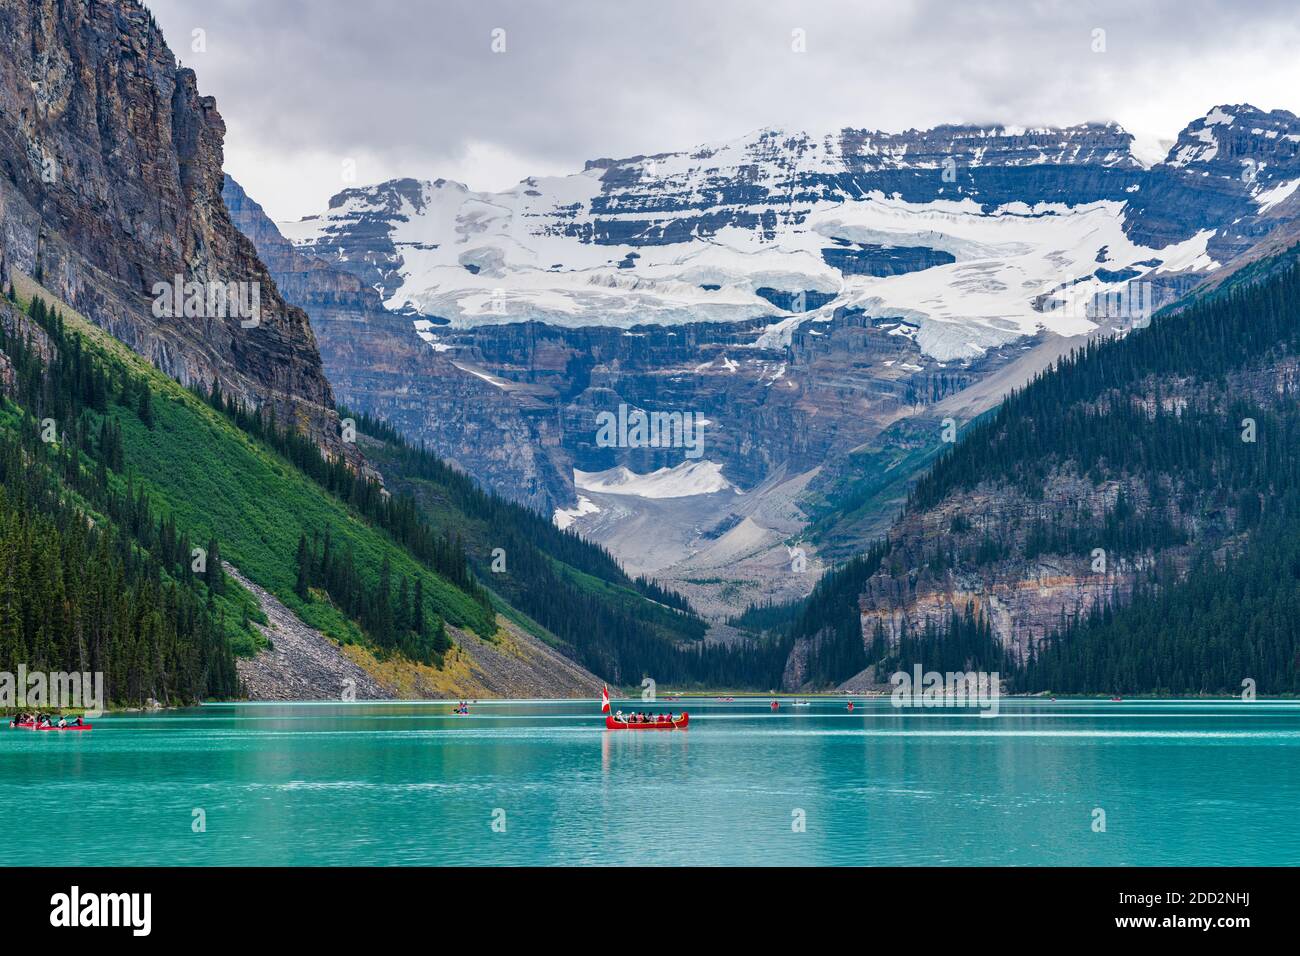 Canoeing on Lake Louise in summer day. Tourists enjoy leisure water activities on the turquoise color lake in Banff National Park, Alberta, Canada. Stock Photo